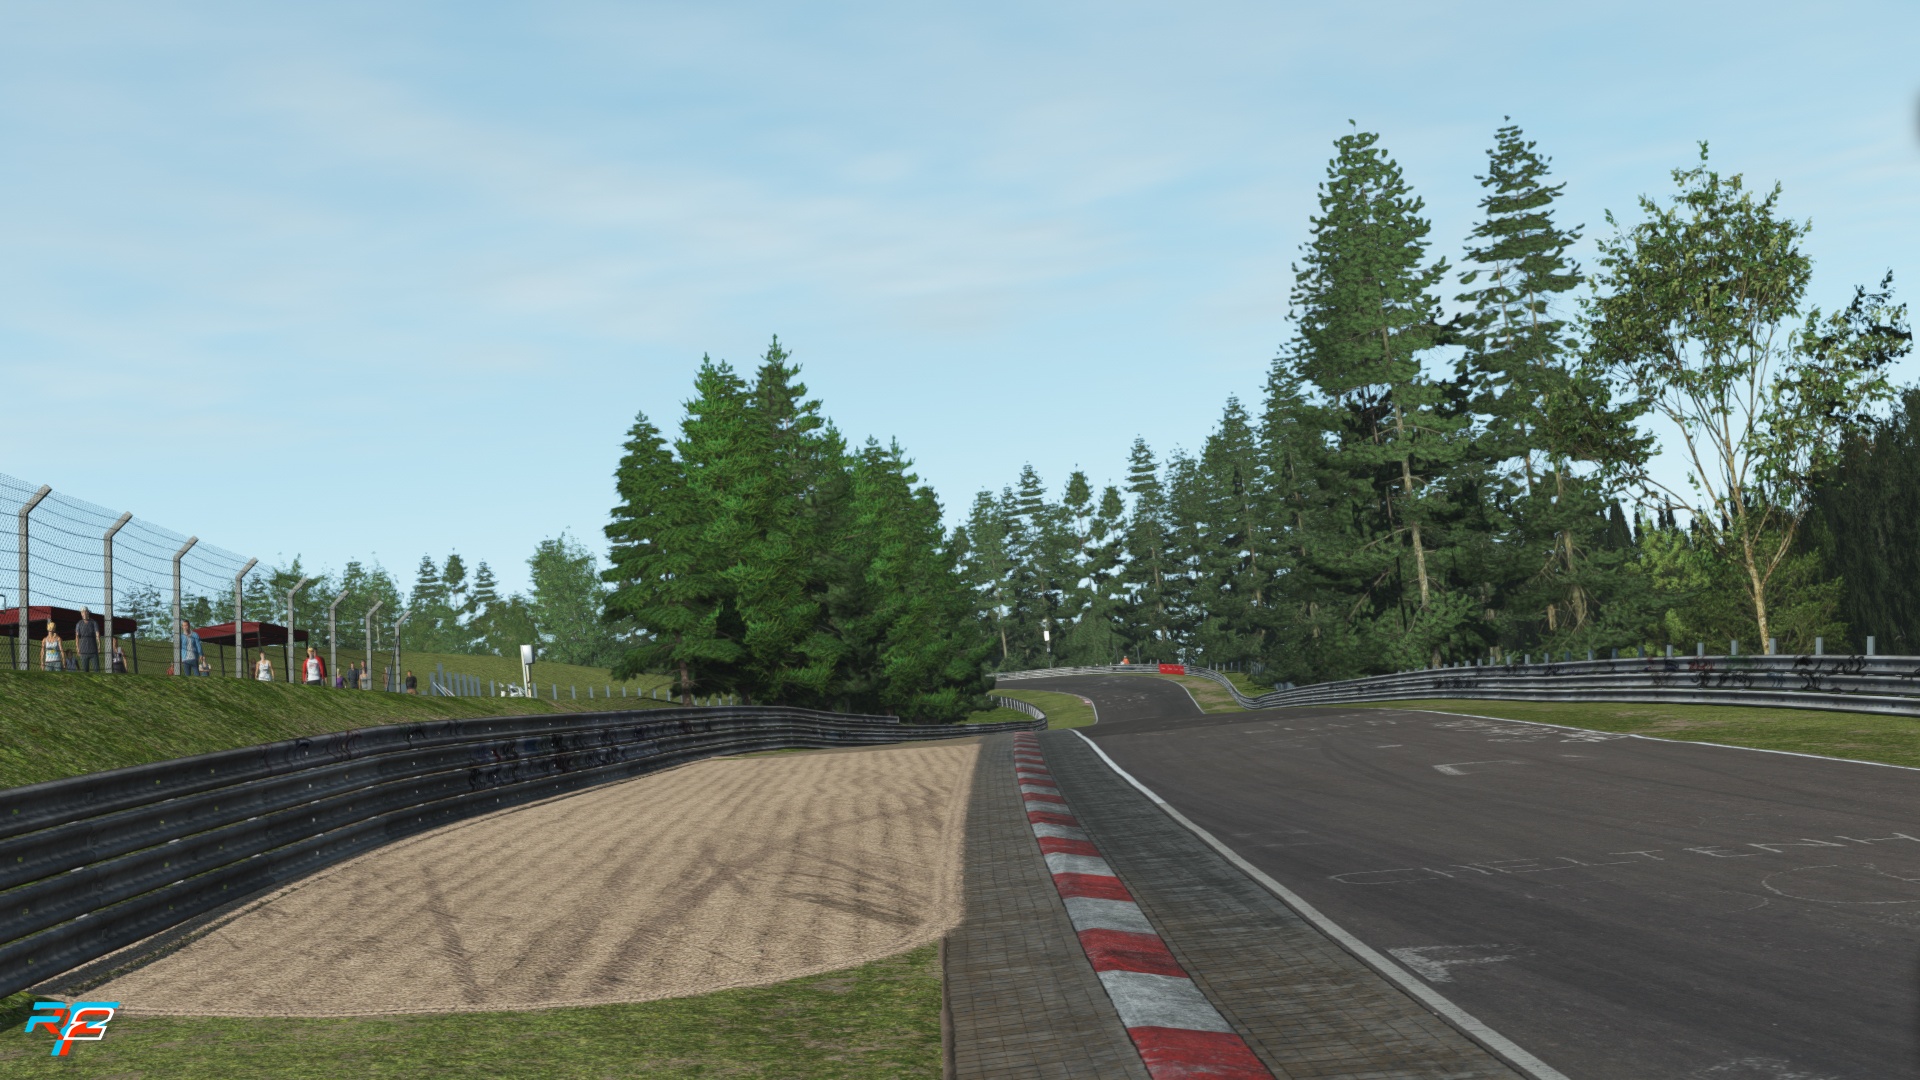 More information about "rFactor 2: December 2020 Track Updates e Cadillac in arrivo"